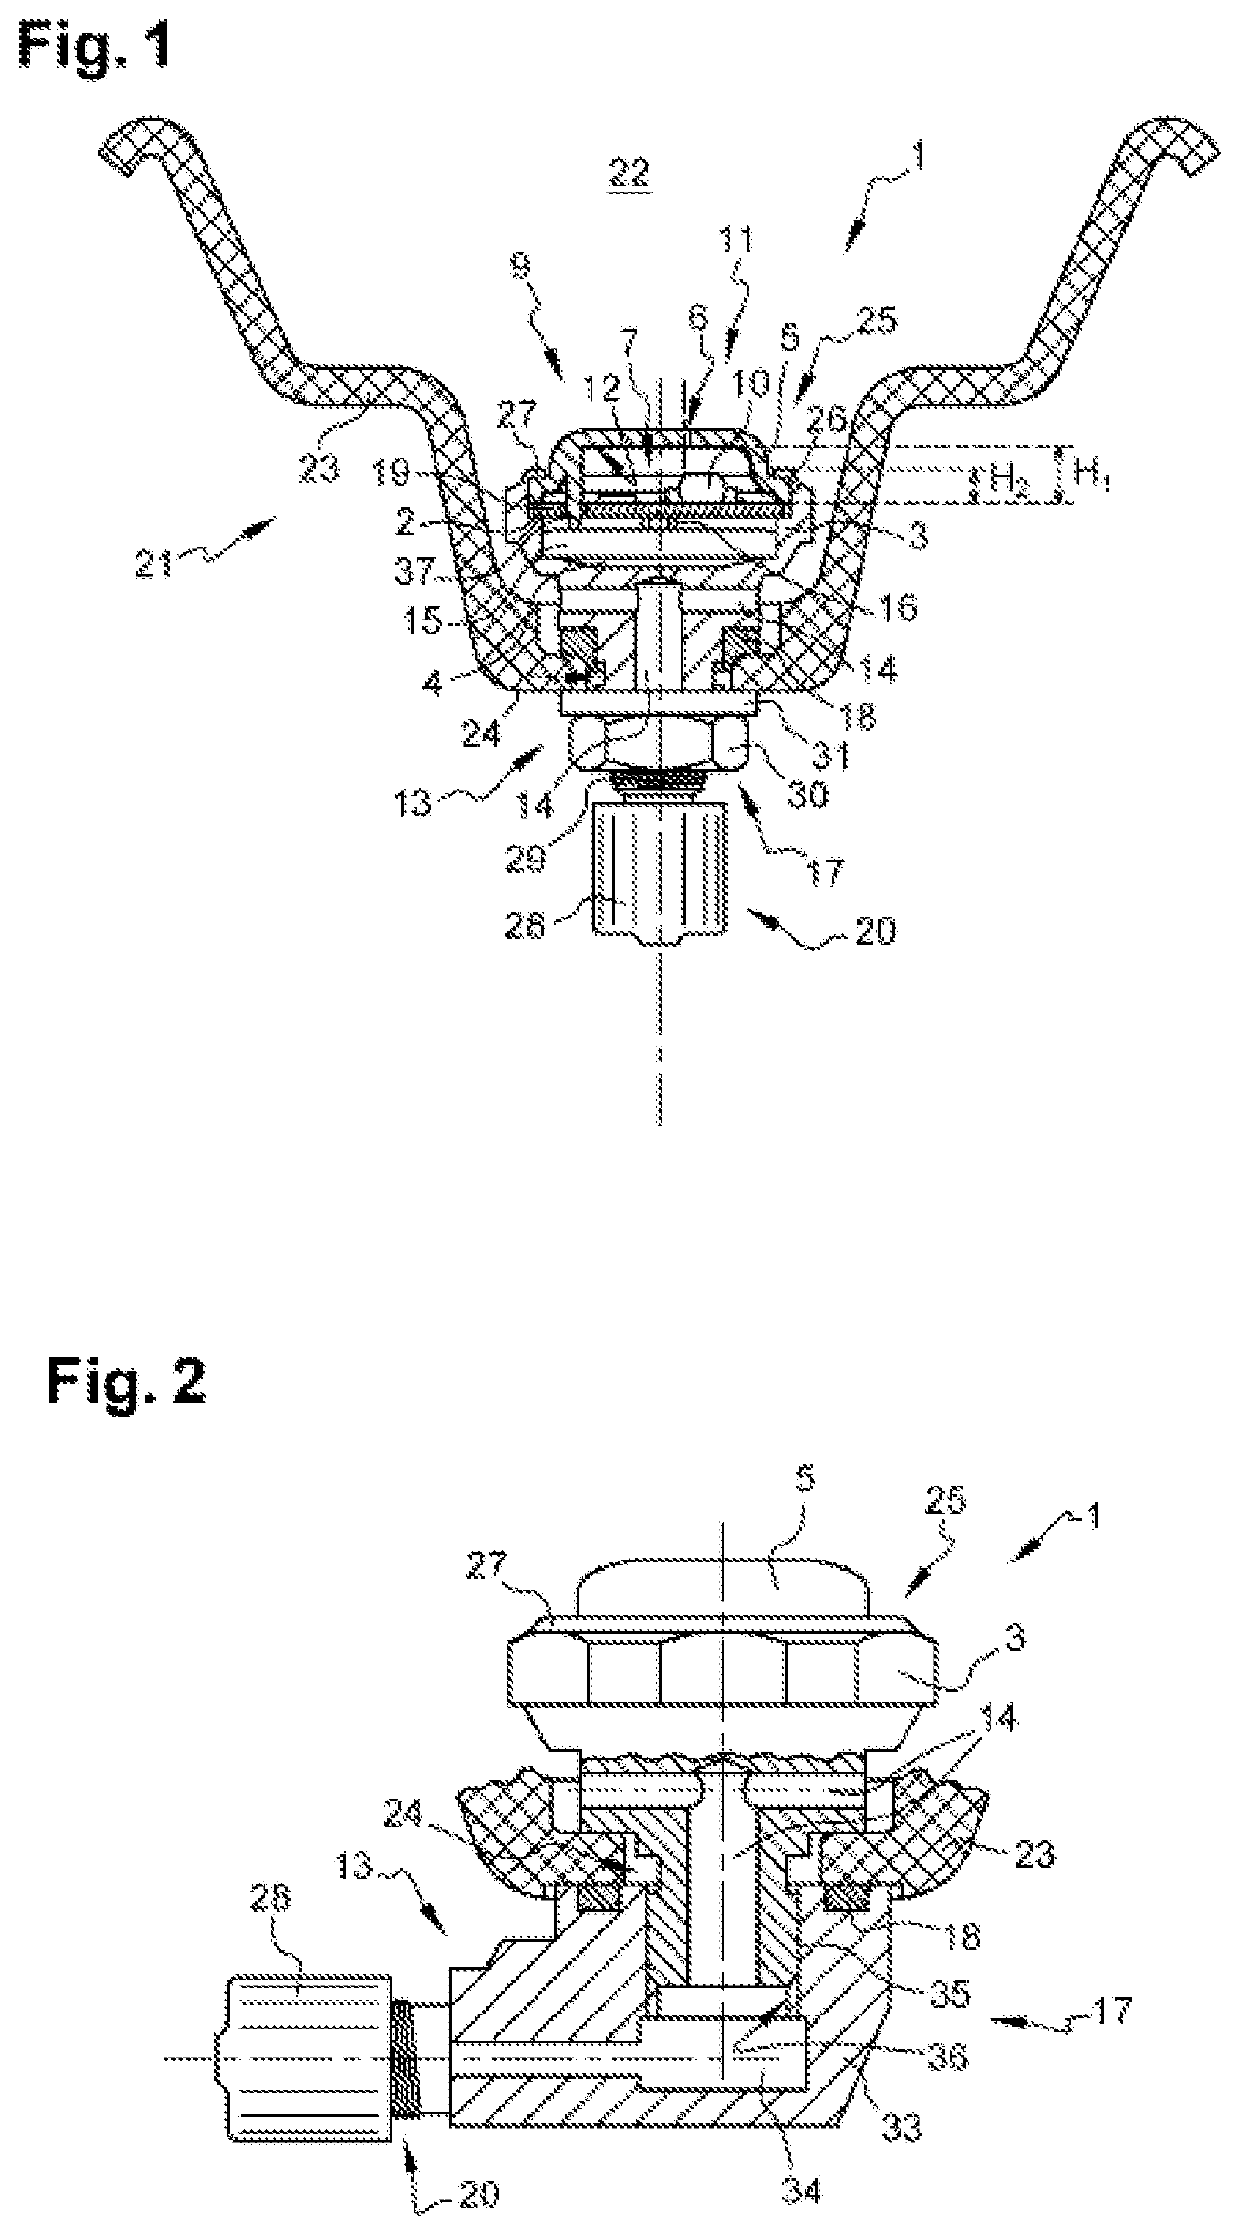 System for measuring at least one physical characteristic for a tyre assembly